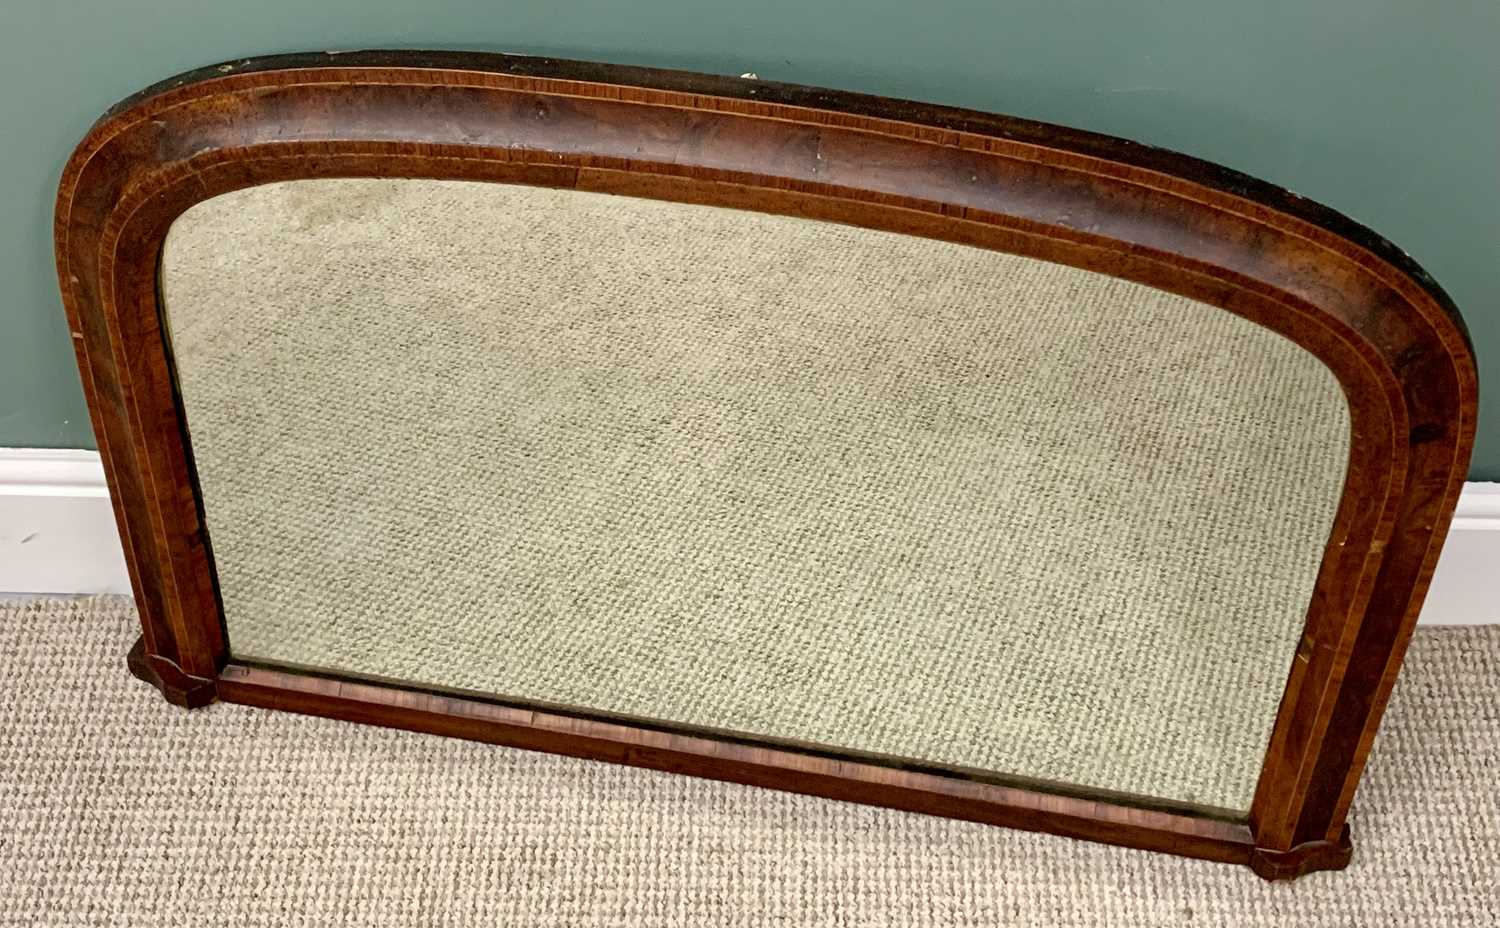 PLUS LOT 17 - OVERMANTEL WALL MIRROR - cross banded burr walnut with arched top, 61cms H, 99cms W,